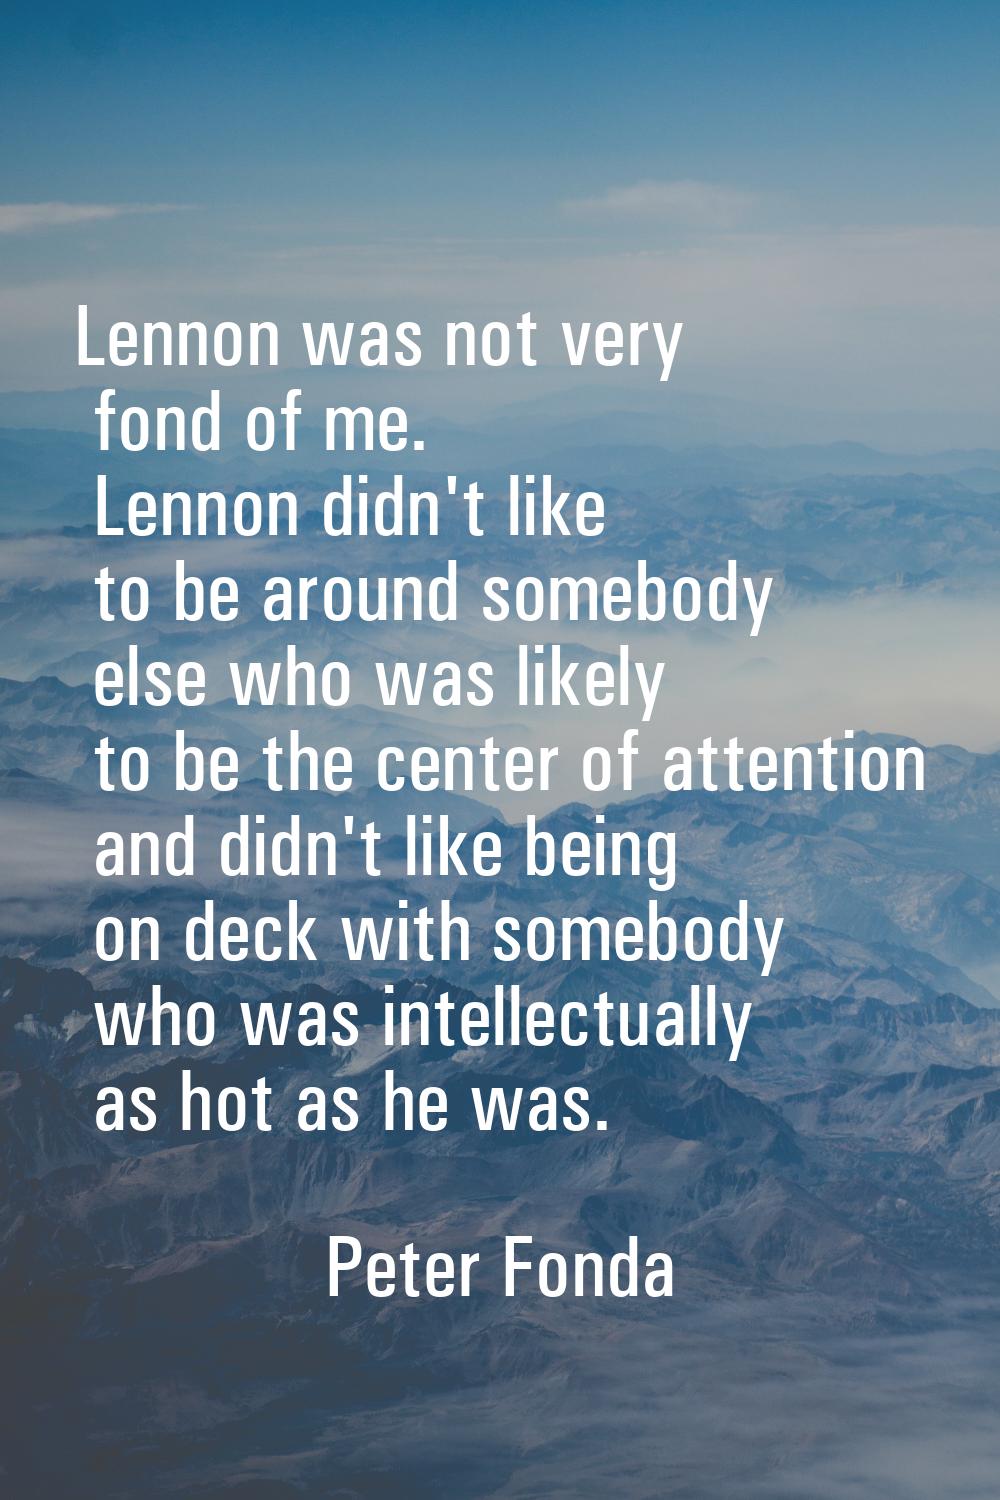 Lennon was not very fond of me. Lennon didn't like to be around somebody else who was likely to be 